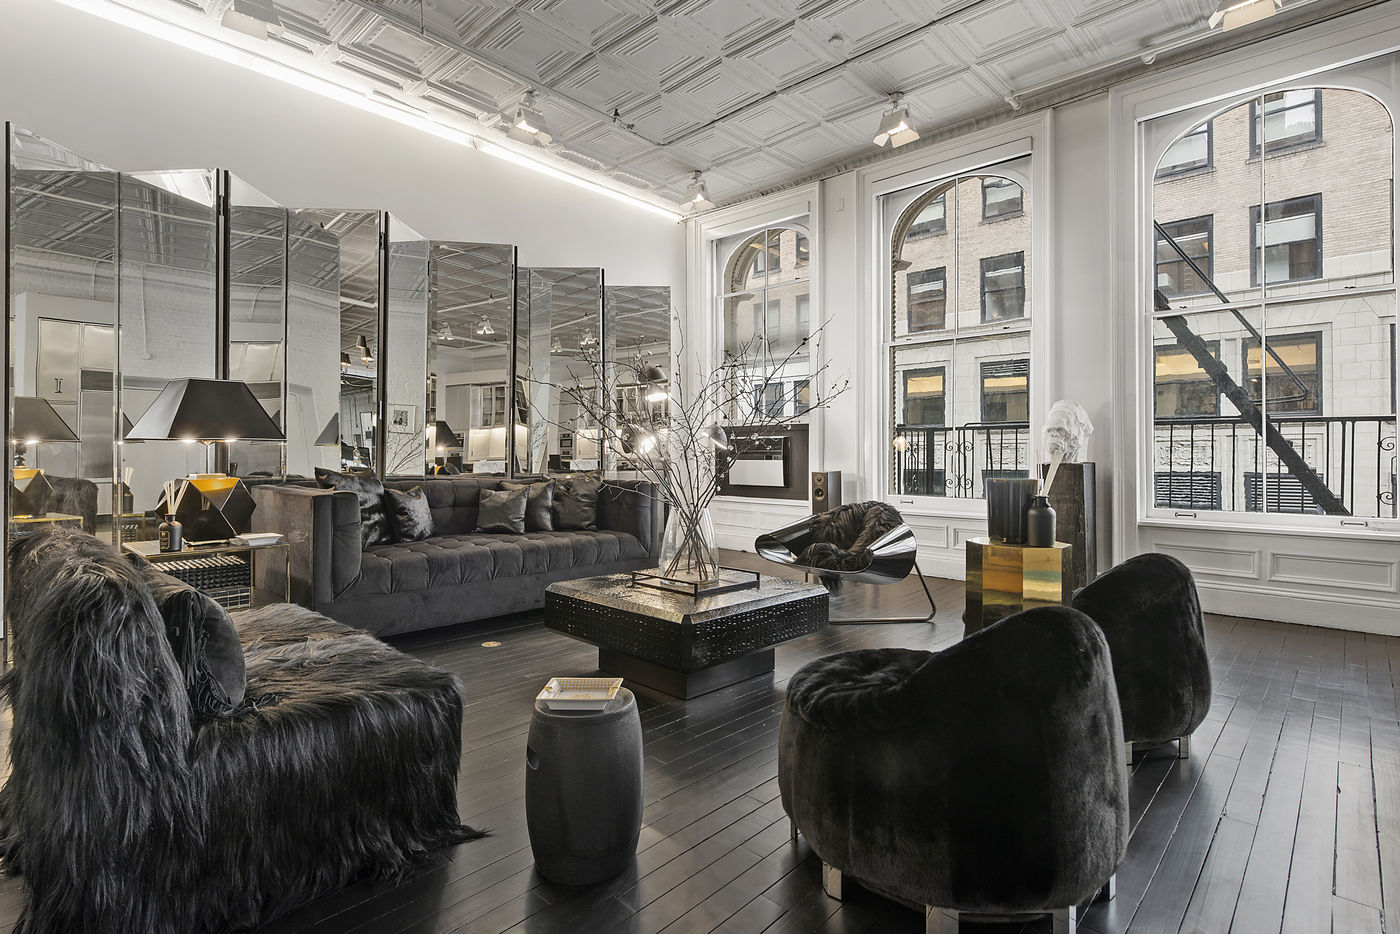 Alexander Wang Lists Luxuriously Moody Tribeca Loft for $3.75M